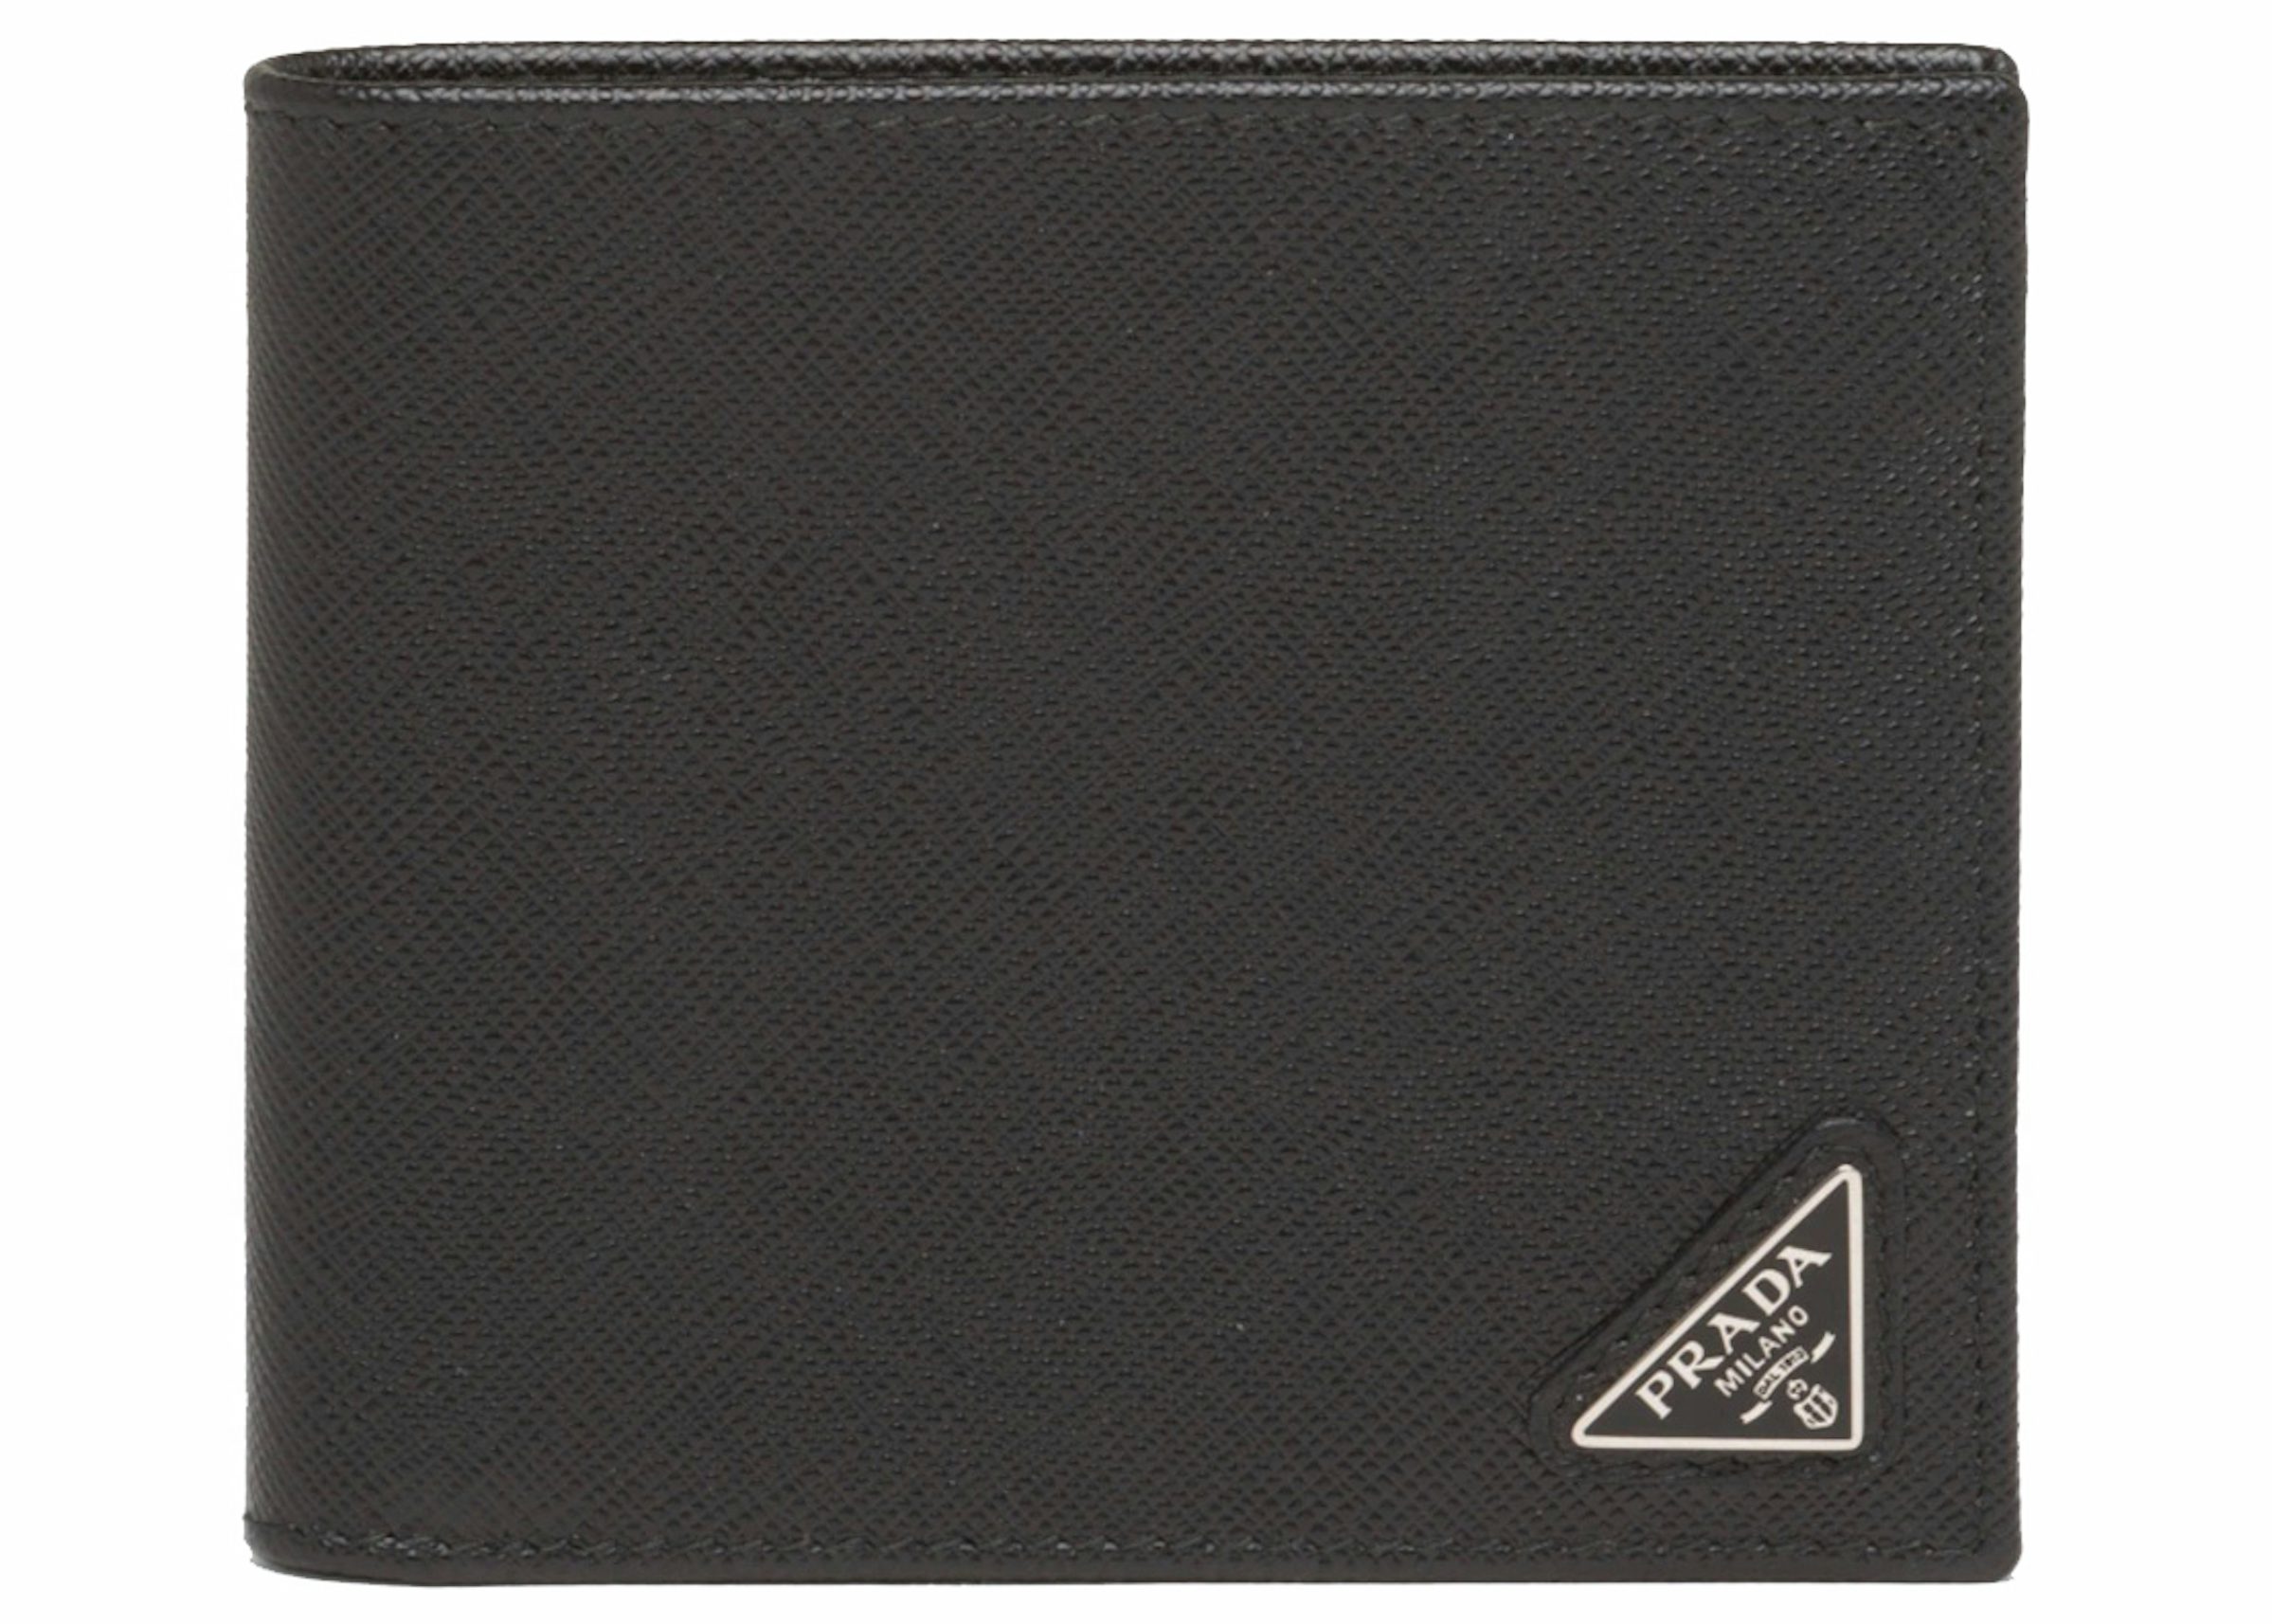 Prada Men's Brushed Leather Wallet - Silver One-Size